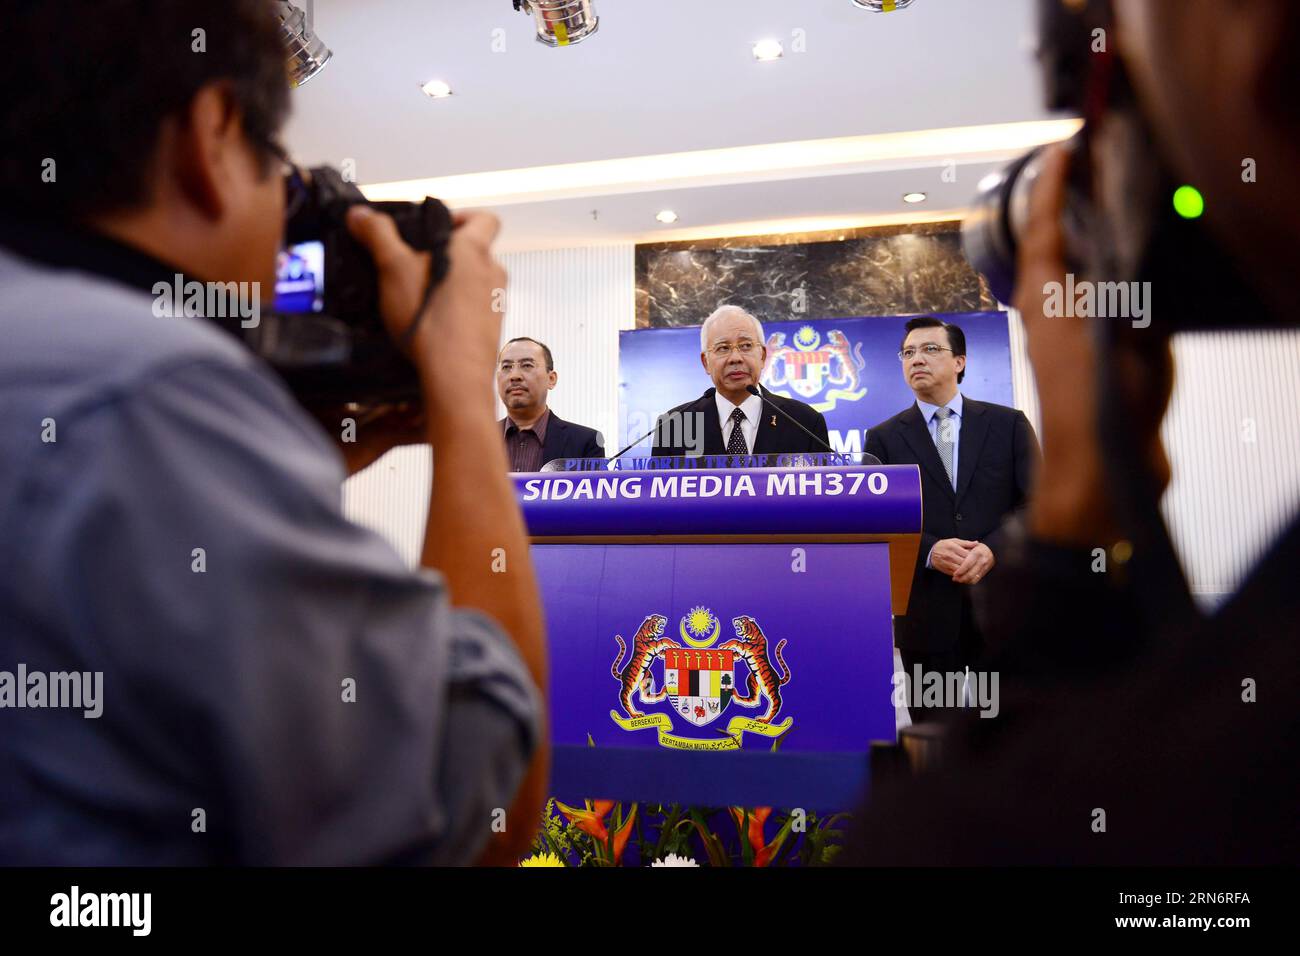 (150806) -- KUALA LUMPUR, Aug. 6, 2015 -- Malaysian Prime Minister Najib Razak (C) attends a press conference on the missing Malaysian Airlines flight MH370 in Kuala Lumpur, Malaysia, Aug. 6, 2015. Verification had confirmed that the debris discovered on the Reunion Island belongs to the missing Malaysian Airlines flight MH370, Malaysian Prime Minister Najib Razak announced here early on Thursday. ) MALAYSIA-KUALA LUMPUR-PM-MH 370 FLIGHT-PRESS CONFERENCE ChongxVoonxChung PUBLICATIONxNOTxINxCHN   Kuala Lumpur Aug 6 2015 Malaysian Prime Ministers Najib Razak C Attends a Press Conference ON The M Stock Photo